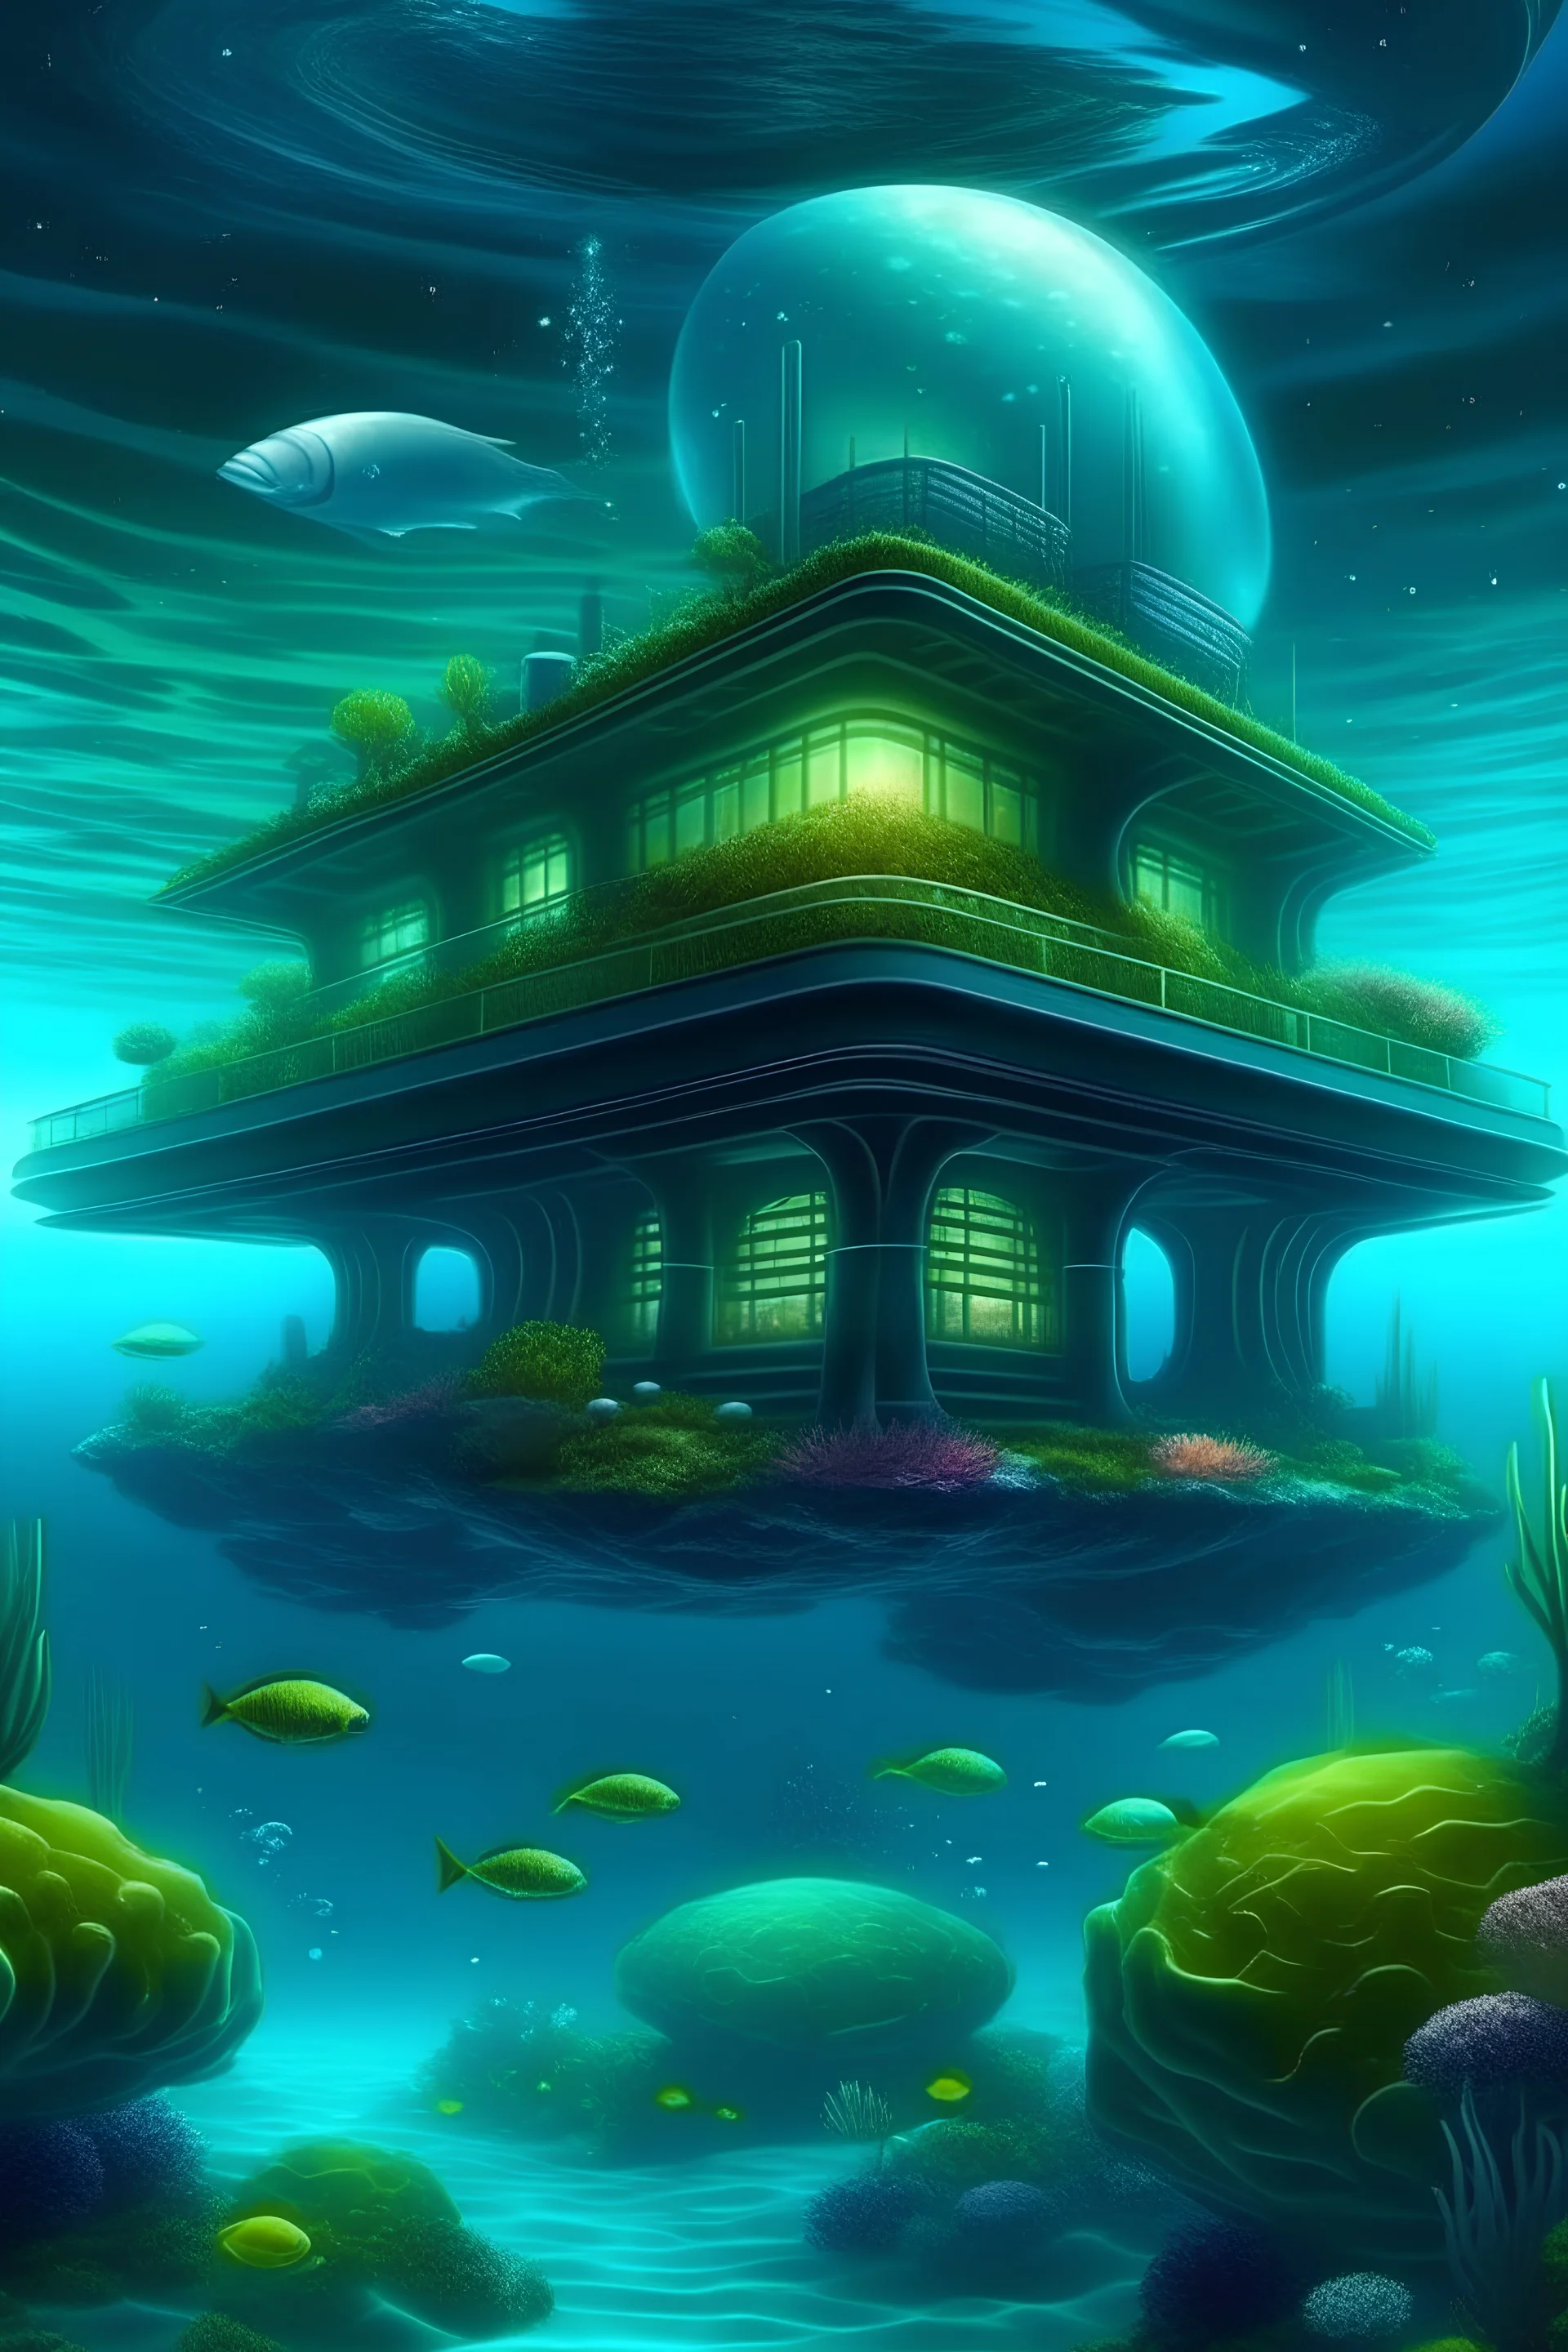 underwater mobile mansion on a holographic battleground in an extraterrestrial metropolis